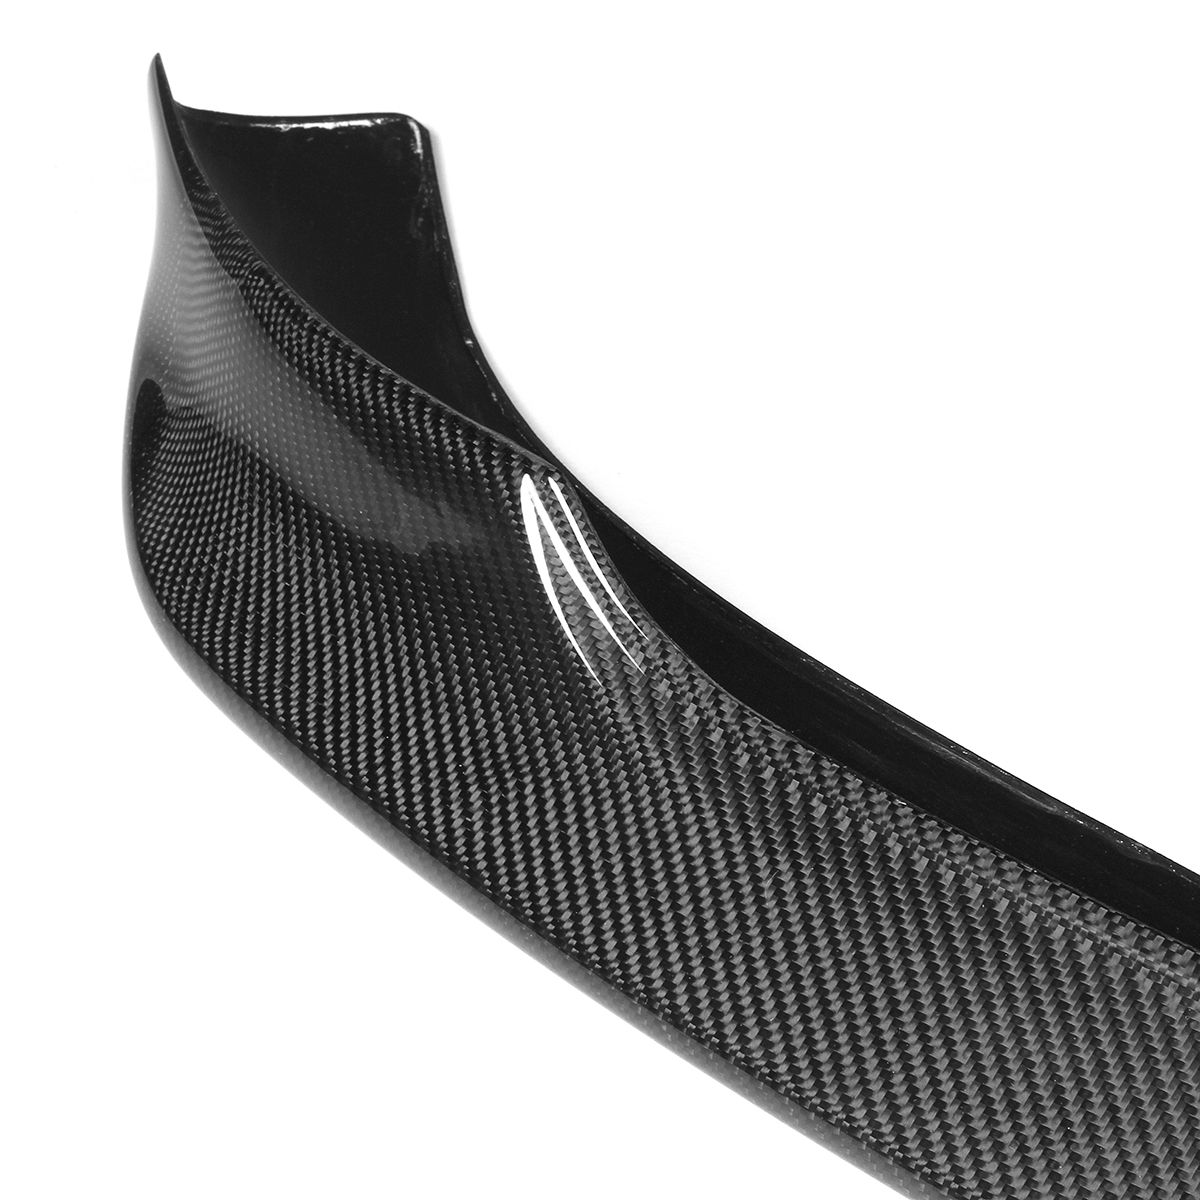 Carbon-Fiber-Rear-Car-Spoiler-Wing-For-2013-16-Subaru-BRZ-FRS-Scion-GT86-And-For-Coupe-TR-D-Style-1357802